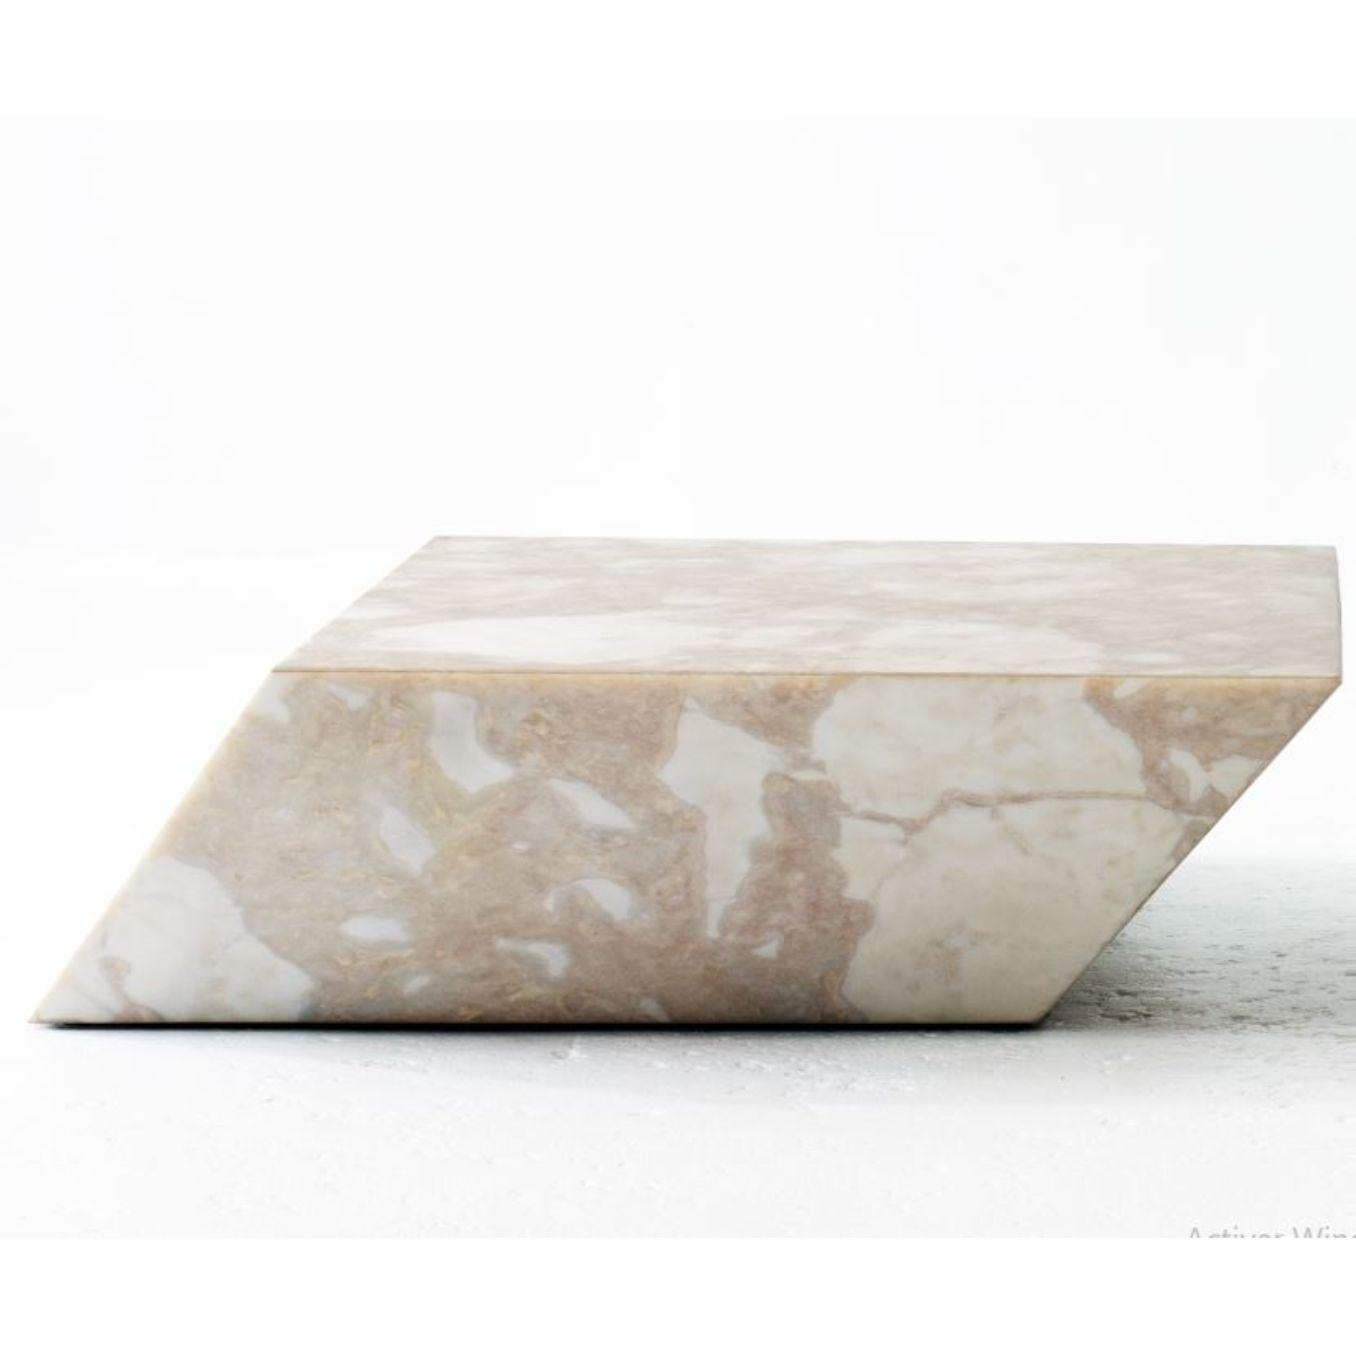 Two sides of solitude coffee table by Claste
Dimensions: D 99 x W 99 x H 30.5 cm
Material: Marble
Weight: 131 kg
Also vailable in two standard sizes.

Since 2017 Quinlan Osborne has cultivated an aesthetic in his work that is rooted in the